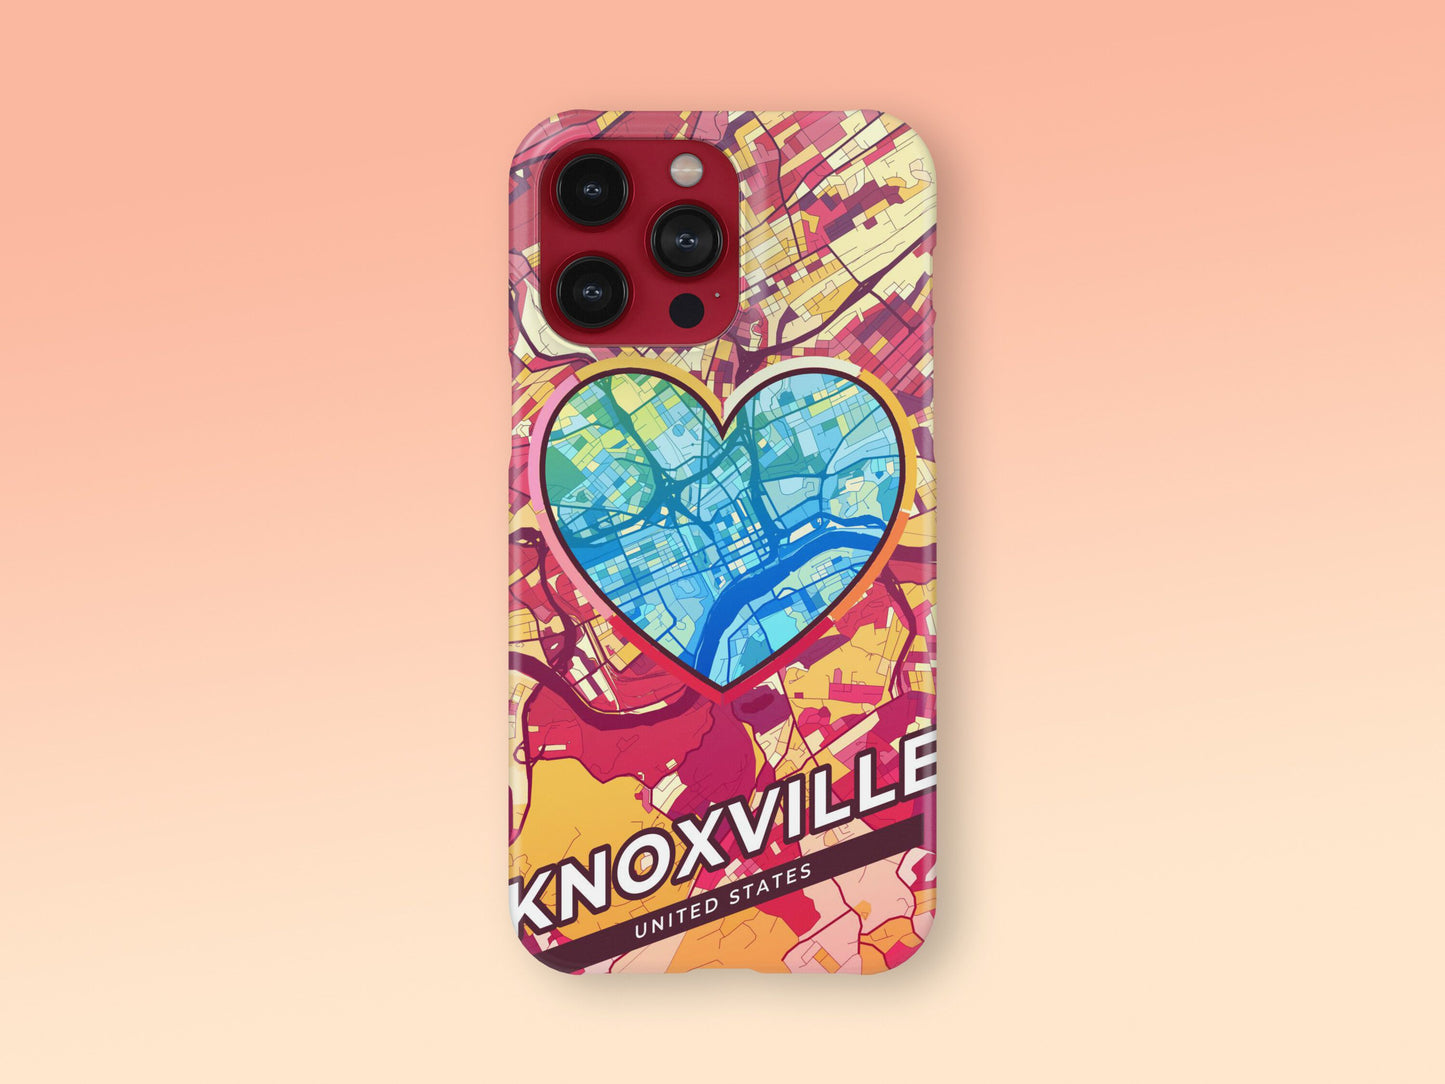 Knoxville Tennessee slim phone case with colorful icon. Birthday, wedding or housewarming gift. Couple match cases. 2